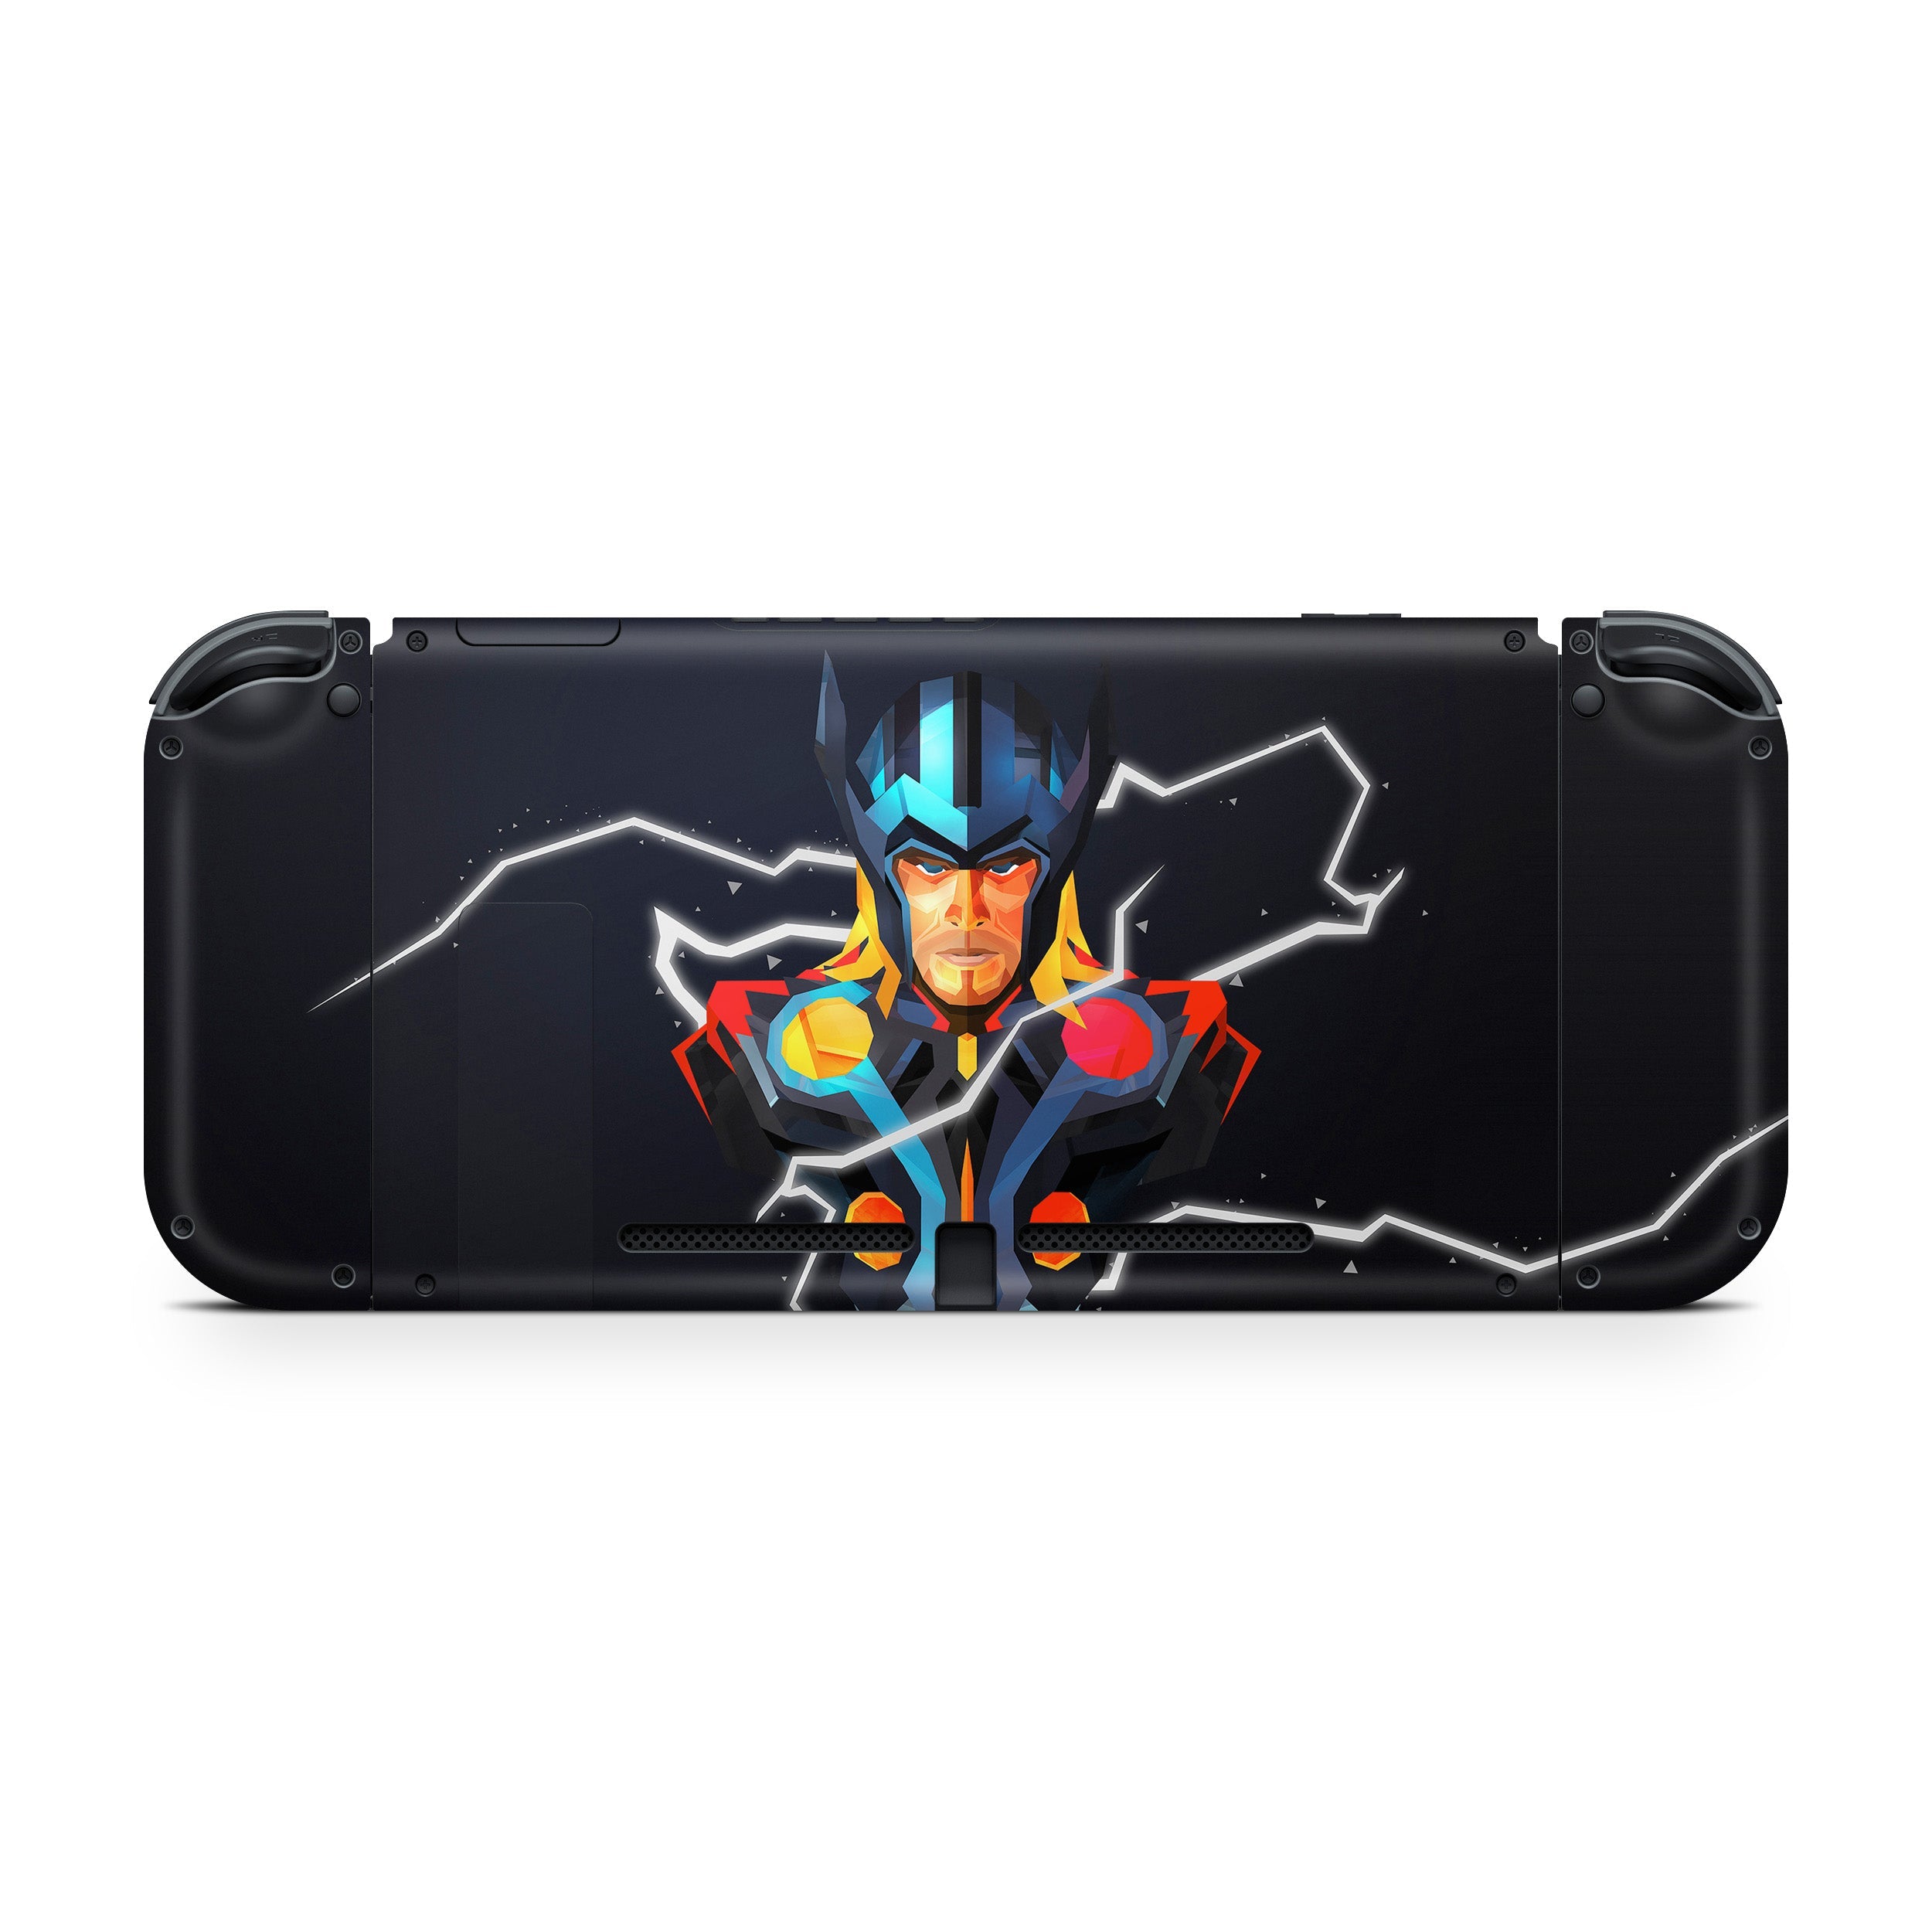 A video game skin featuring a Marvel Comics Thor design for the Nintendo Switch.